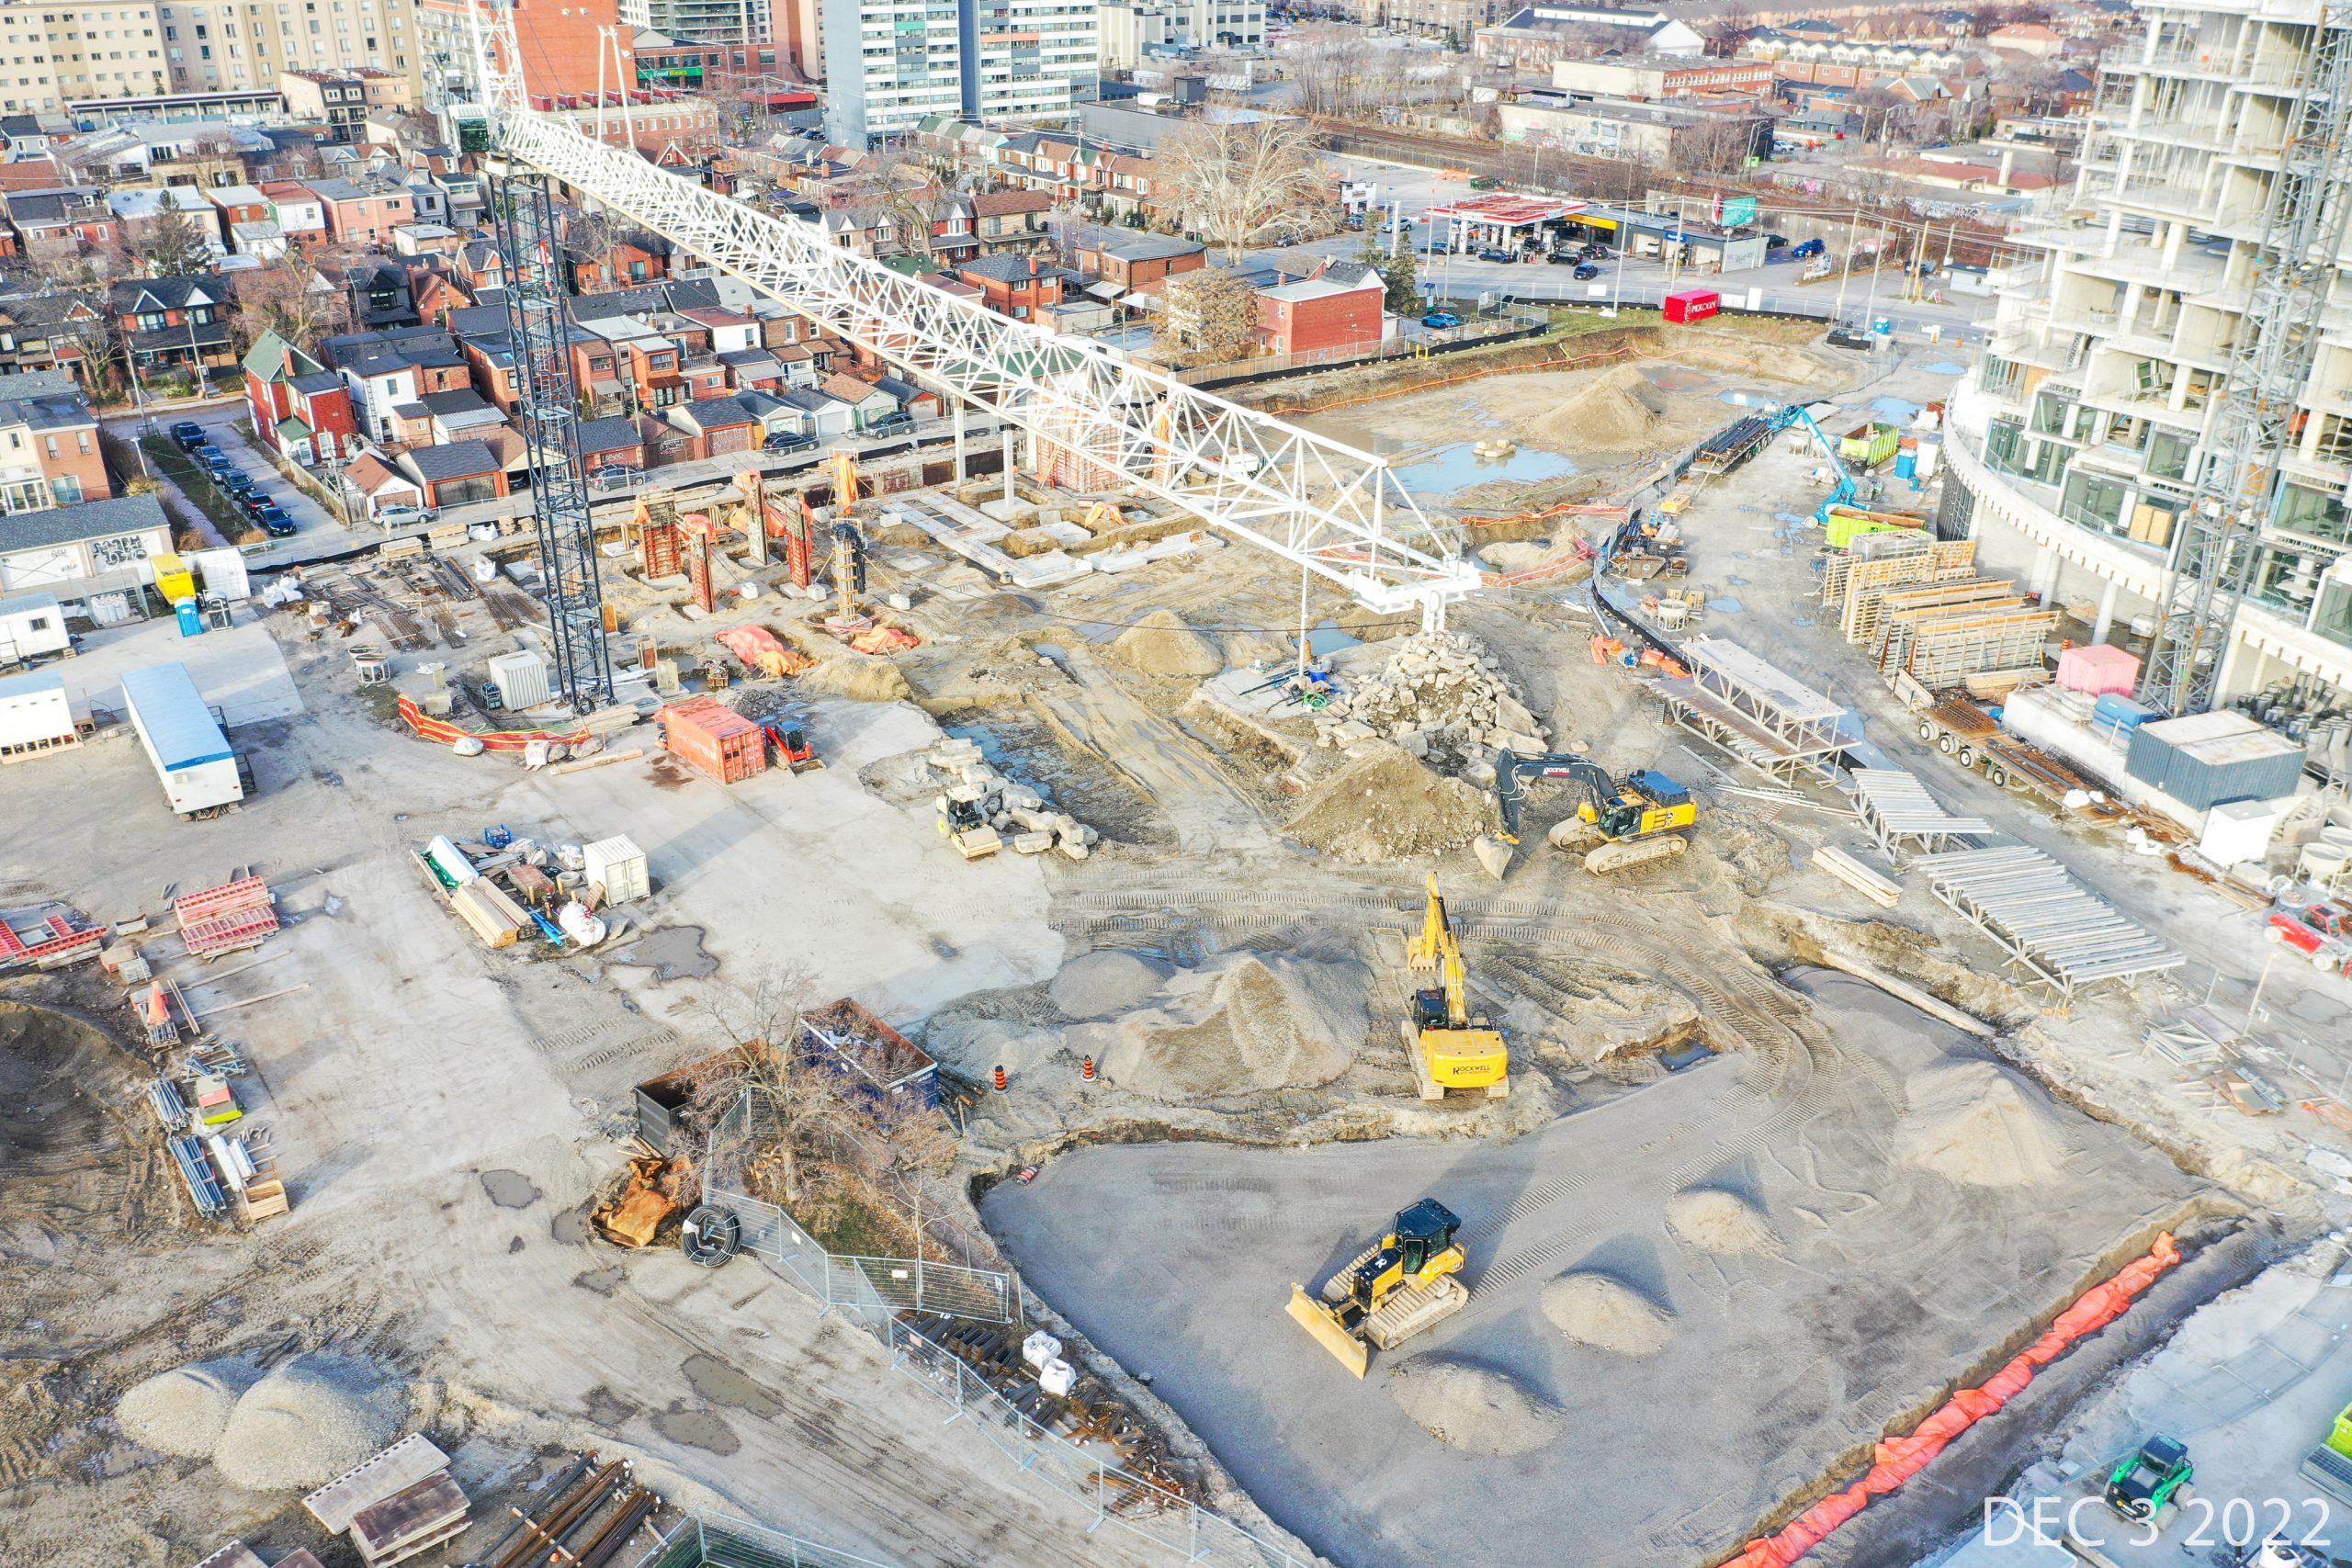 An aerial photograph of the construction site at Wallace Emersion Community Centre on December 3, 2022, which shows a large crane and multiple excavators and construction equipment. The construction area is predominantly flat, with soil and sand throughout. 